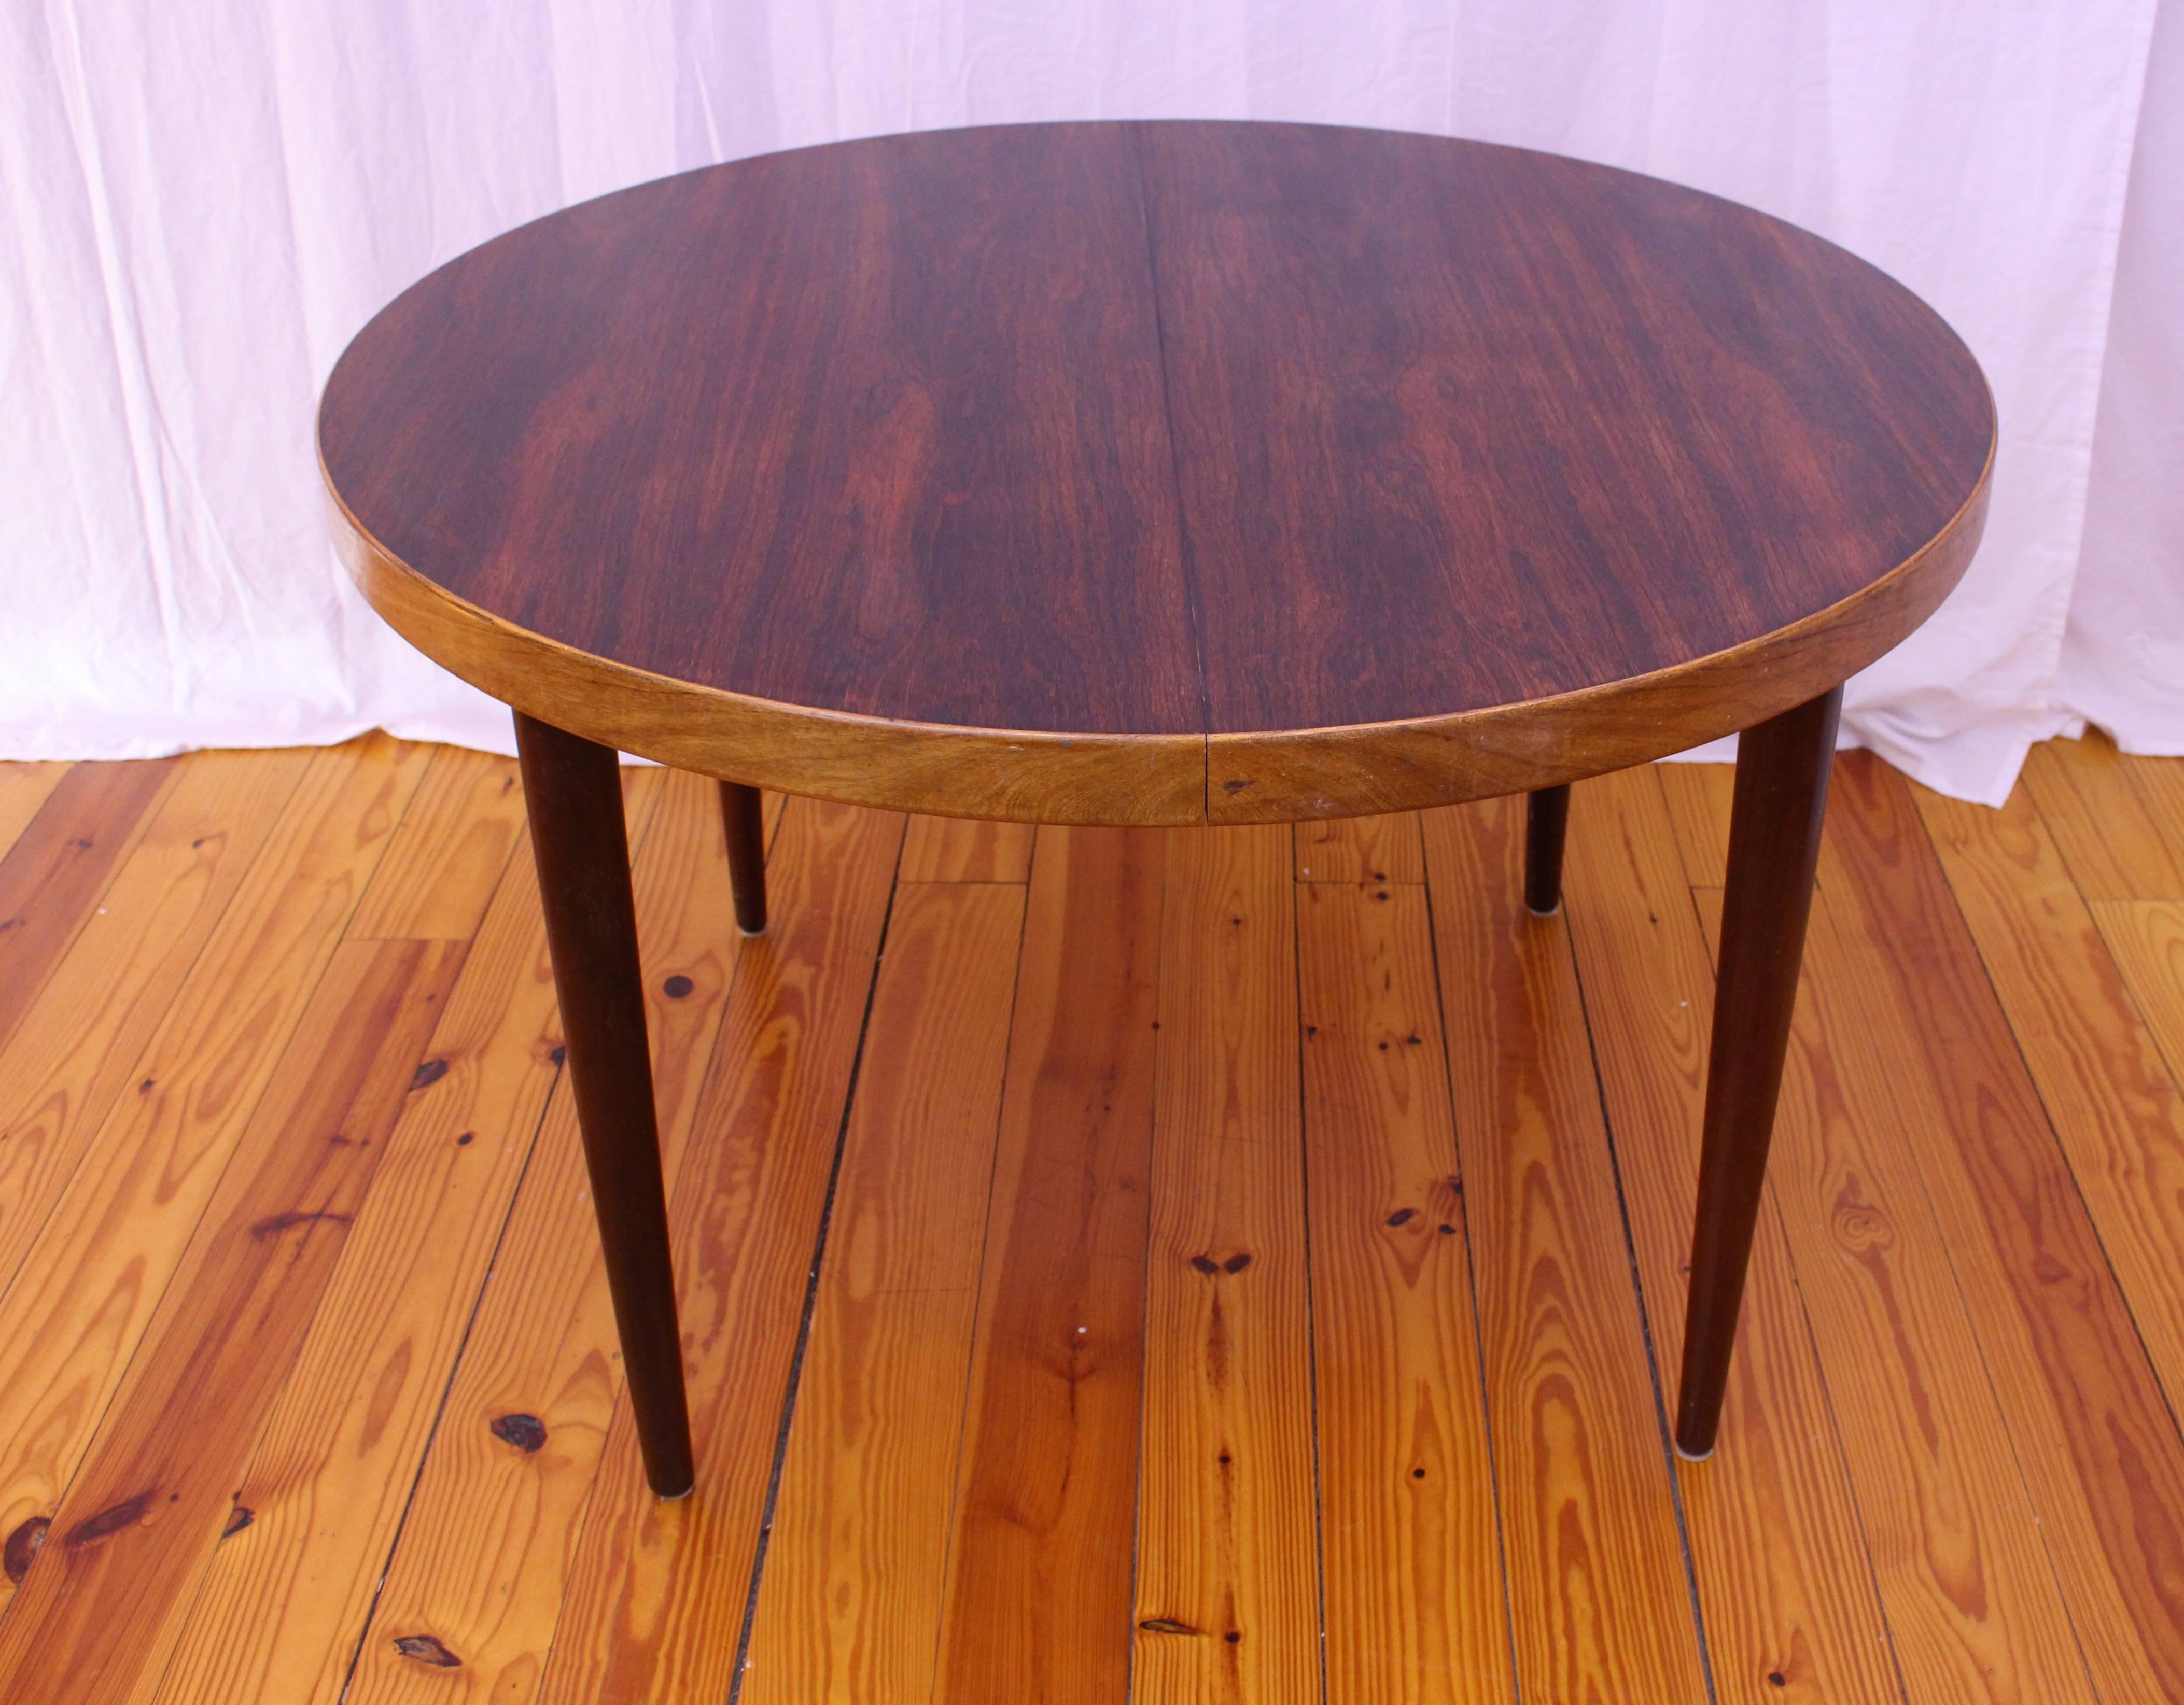 Mid-20th Century Danish, Mid-Century Modern Rosewood and Teak Dining Table by Kai Kristiansen For Sale